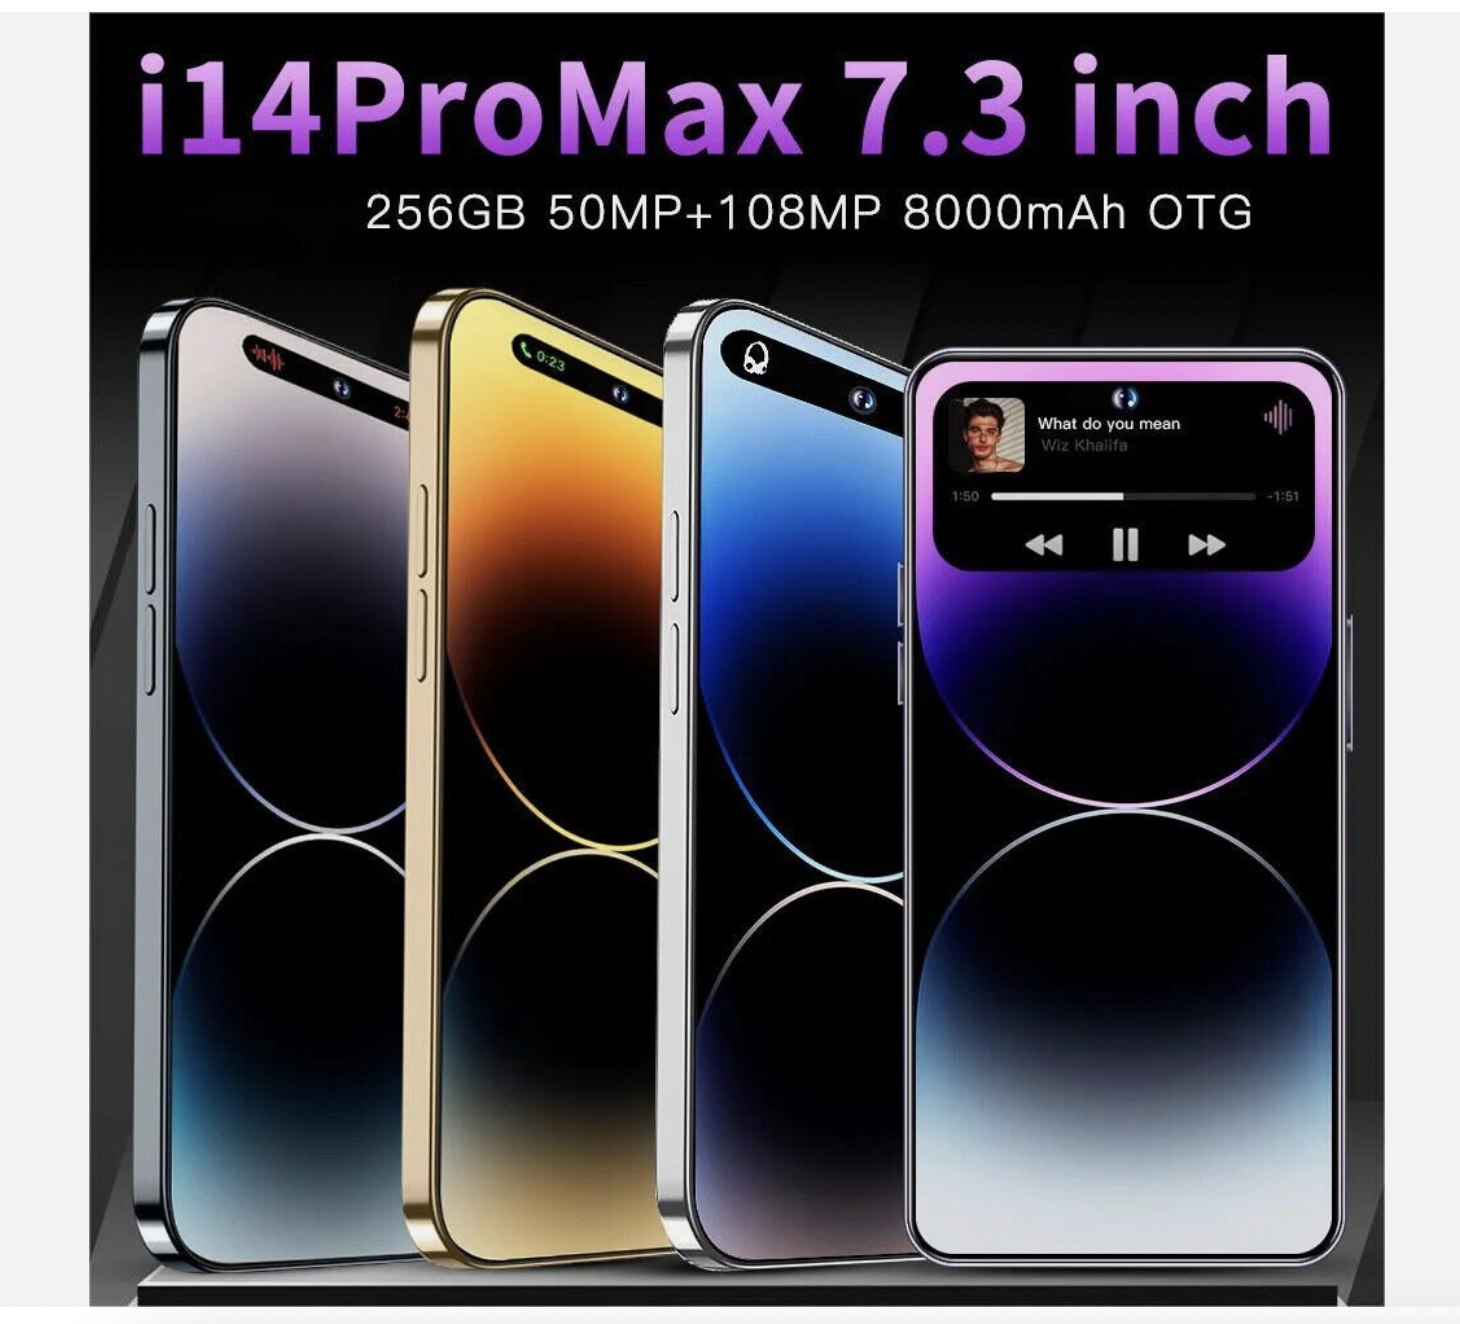 New I15 i14 Pro Max 7.3" Android Smartphone 256GB 4G GSM Global Unlocked Cell Phone unlock mobile phone celular mobile phones androids not iphone 15